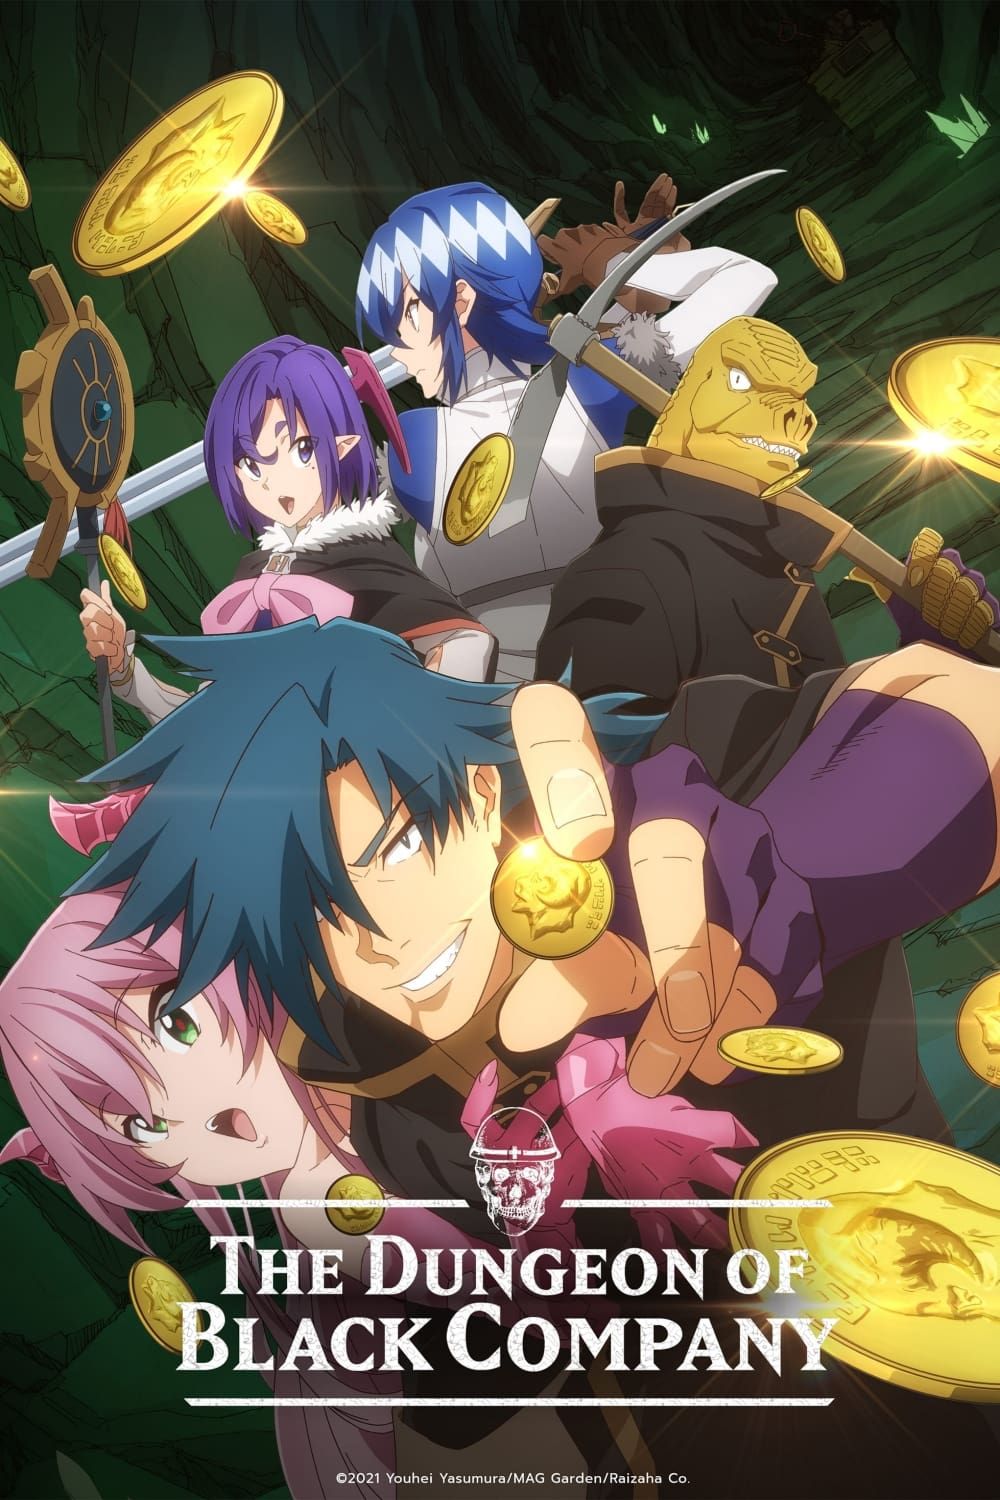 THAT TIME I GOT REINCARNATED AS A SLIME MOVIE ENG.DUB #scarletbond #2